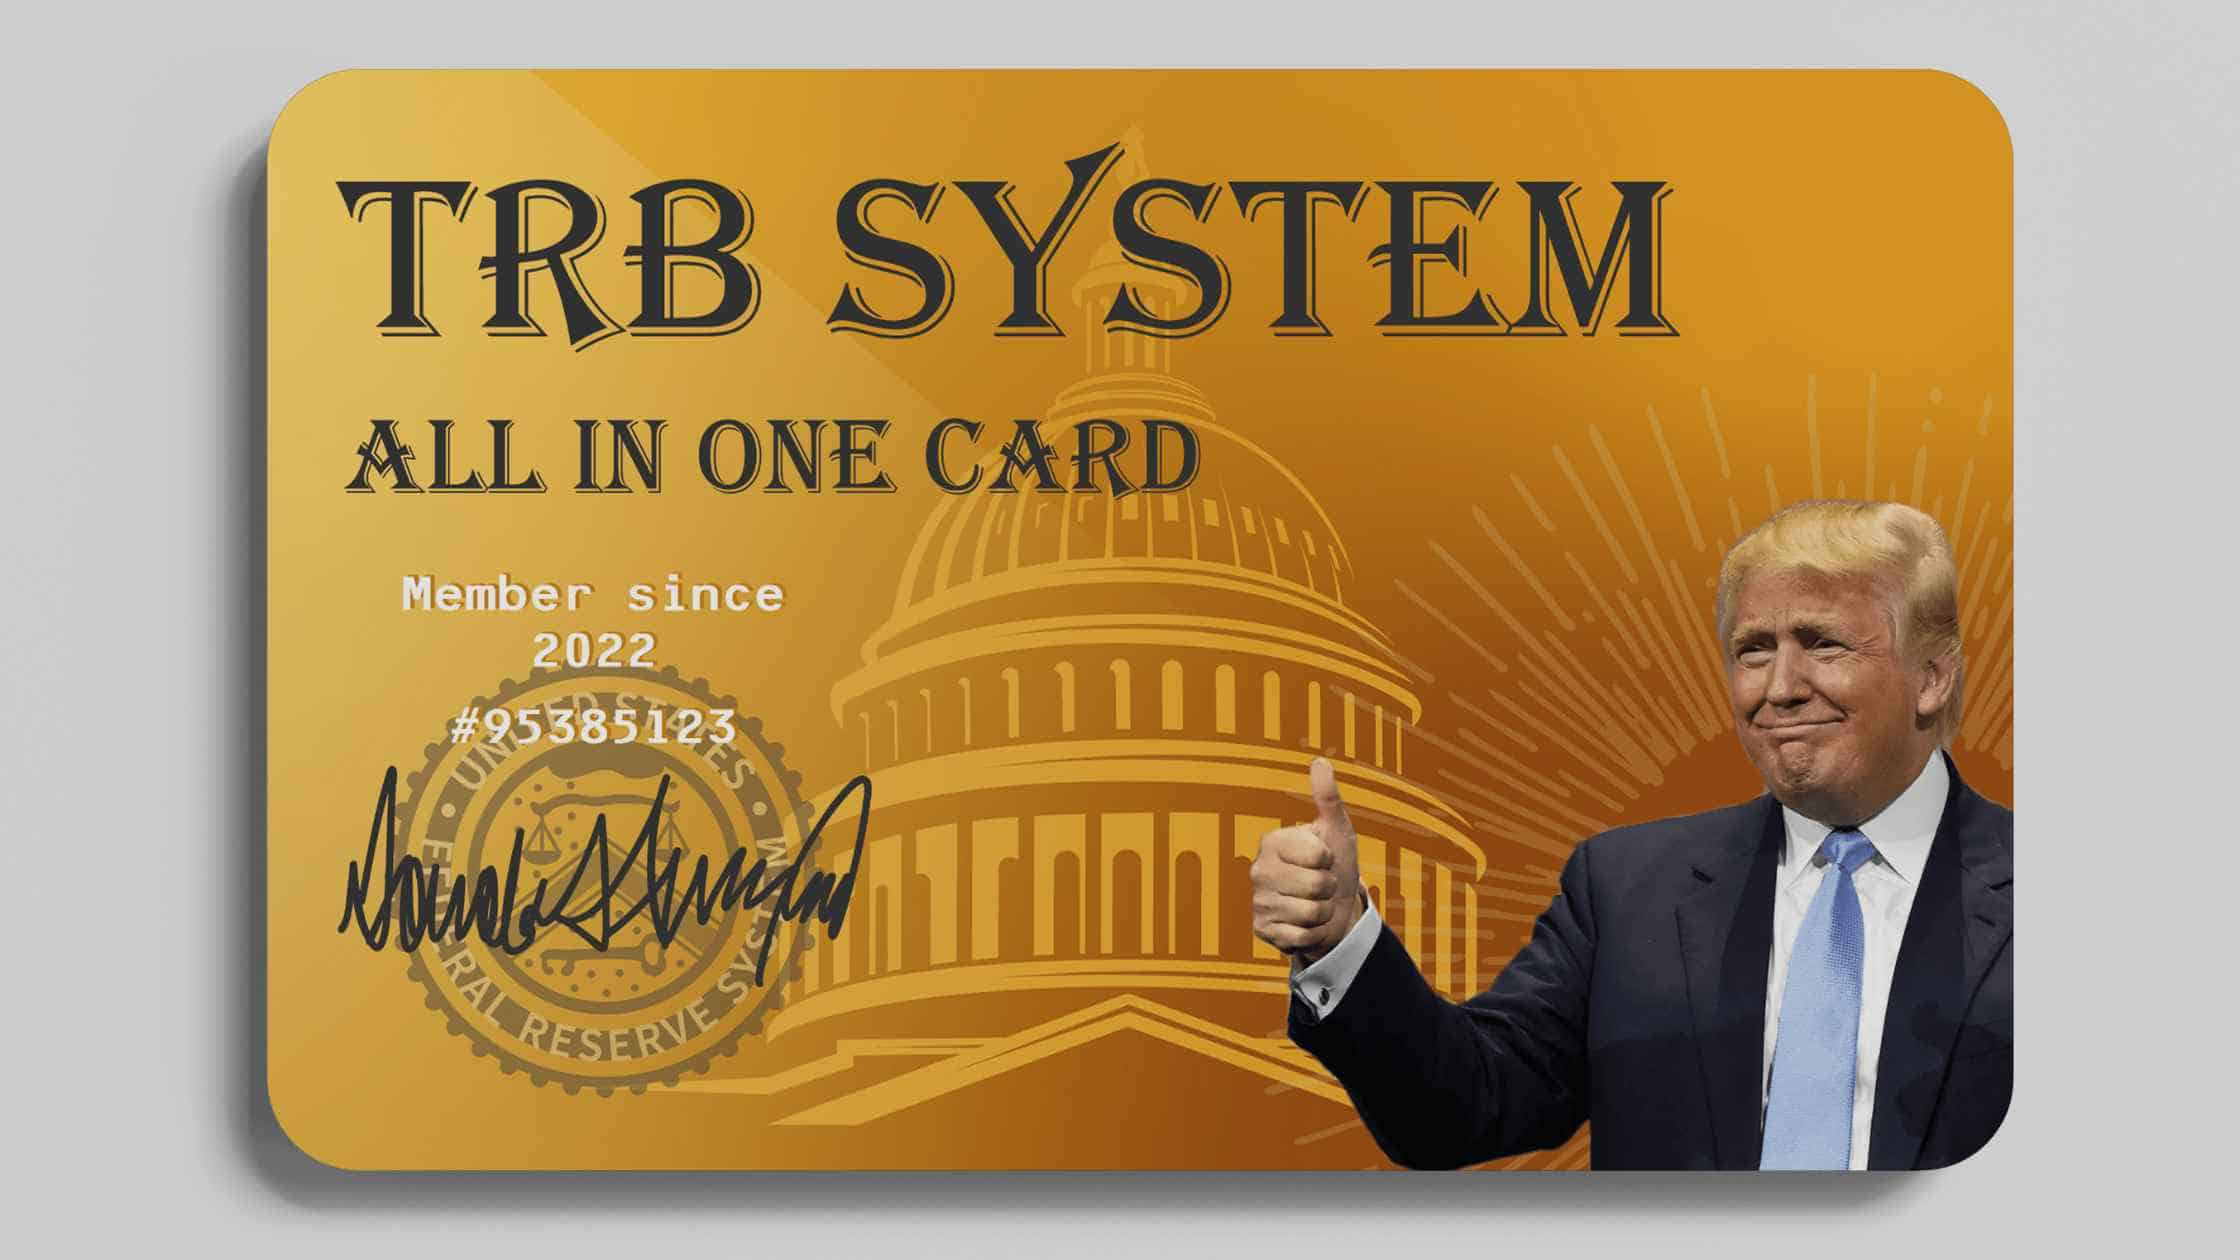 TRB System Card Review